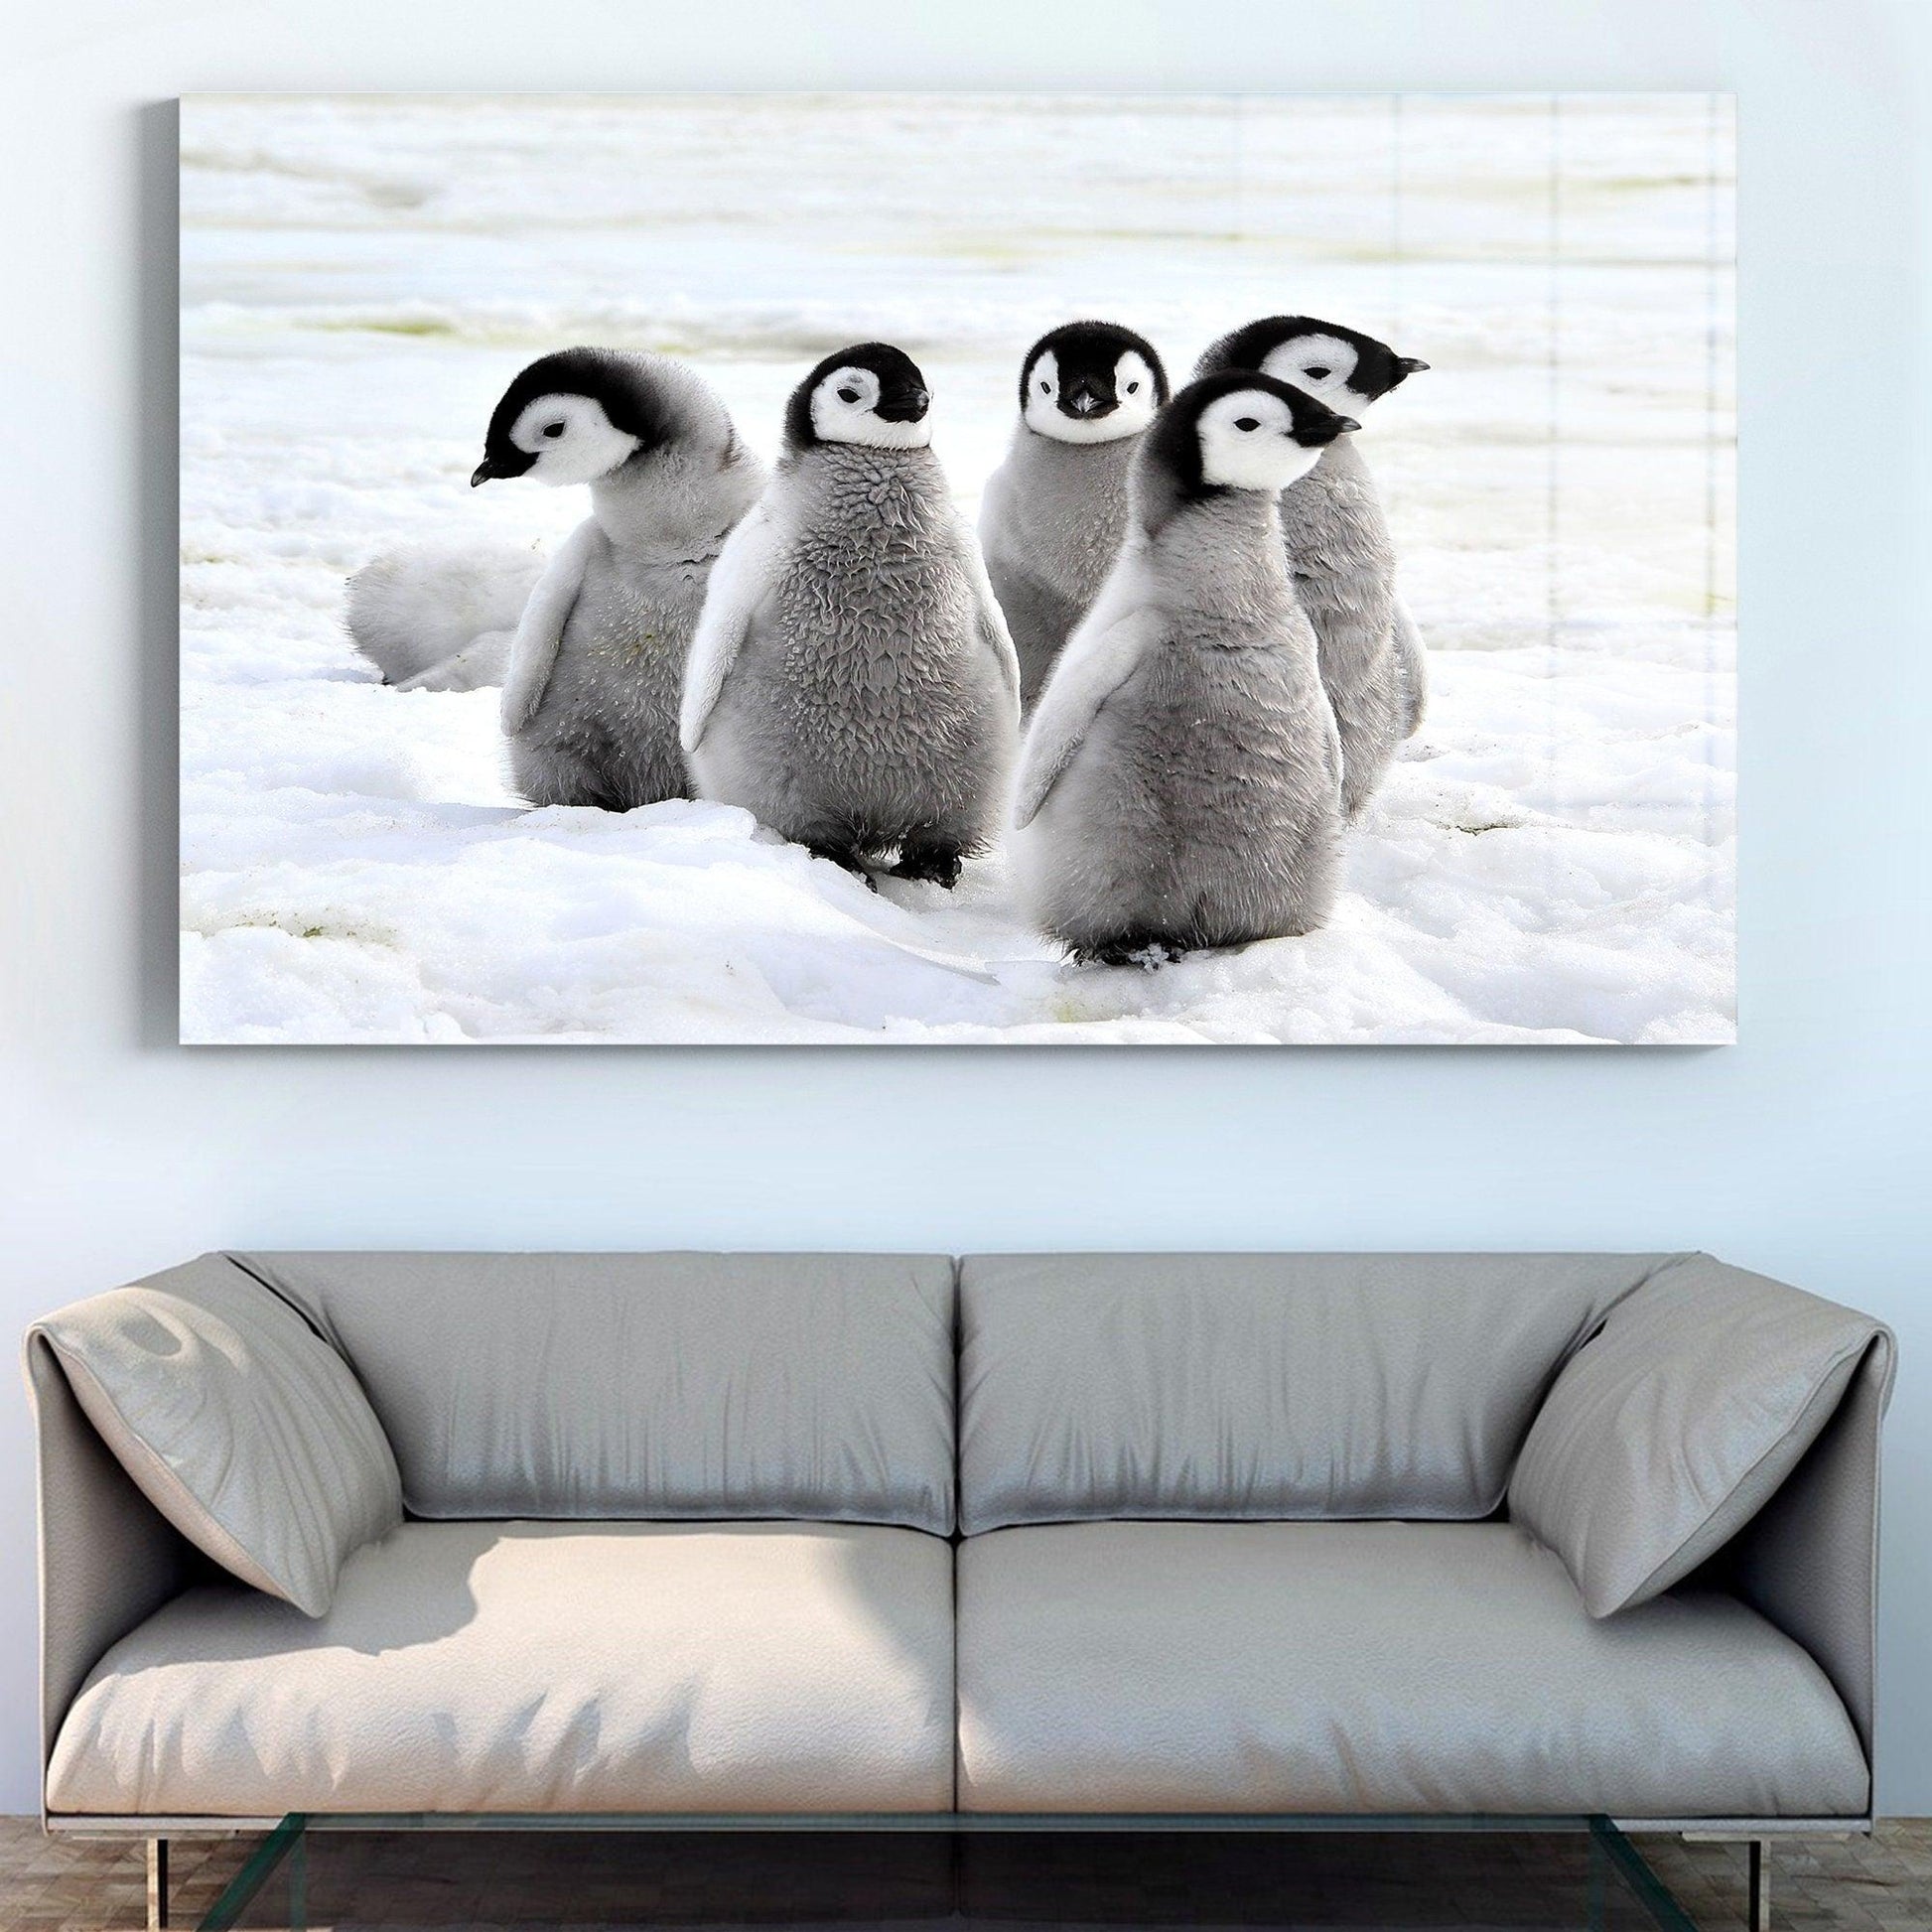 Penguin Tempered Glass Wall Art Large Wall Art, Glass Printing Wall Art, Glass Art Wall Decor, animal Home Decor, Animal Wall Art, Penguin